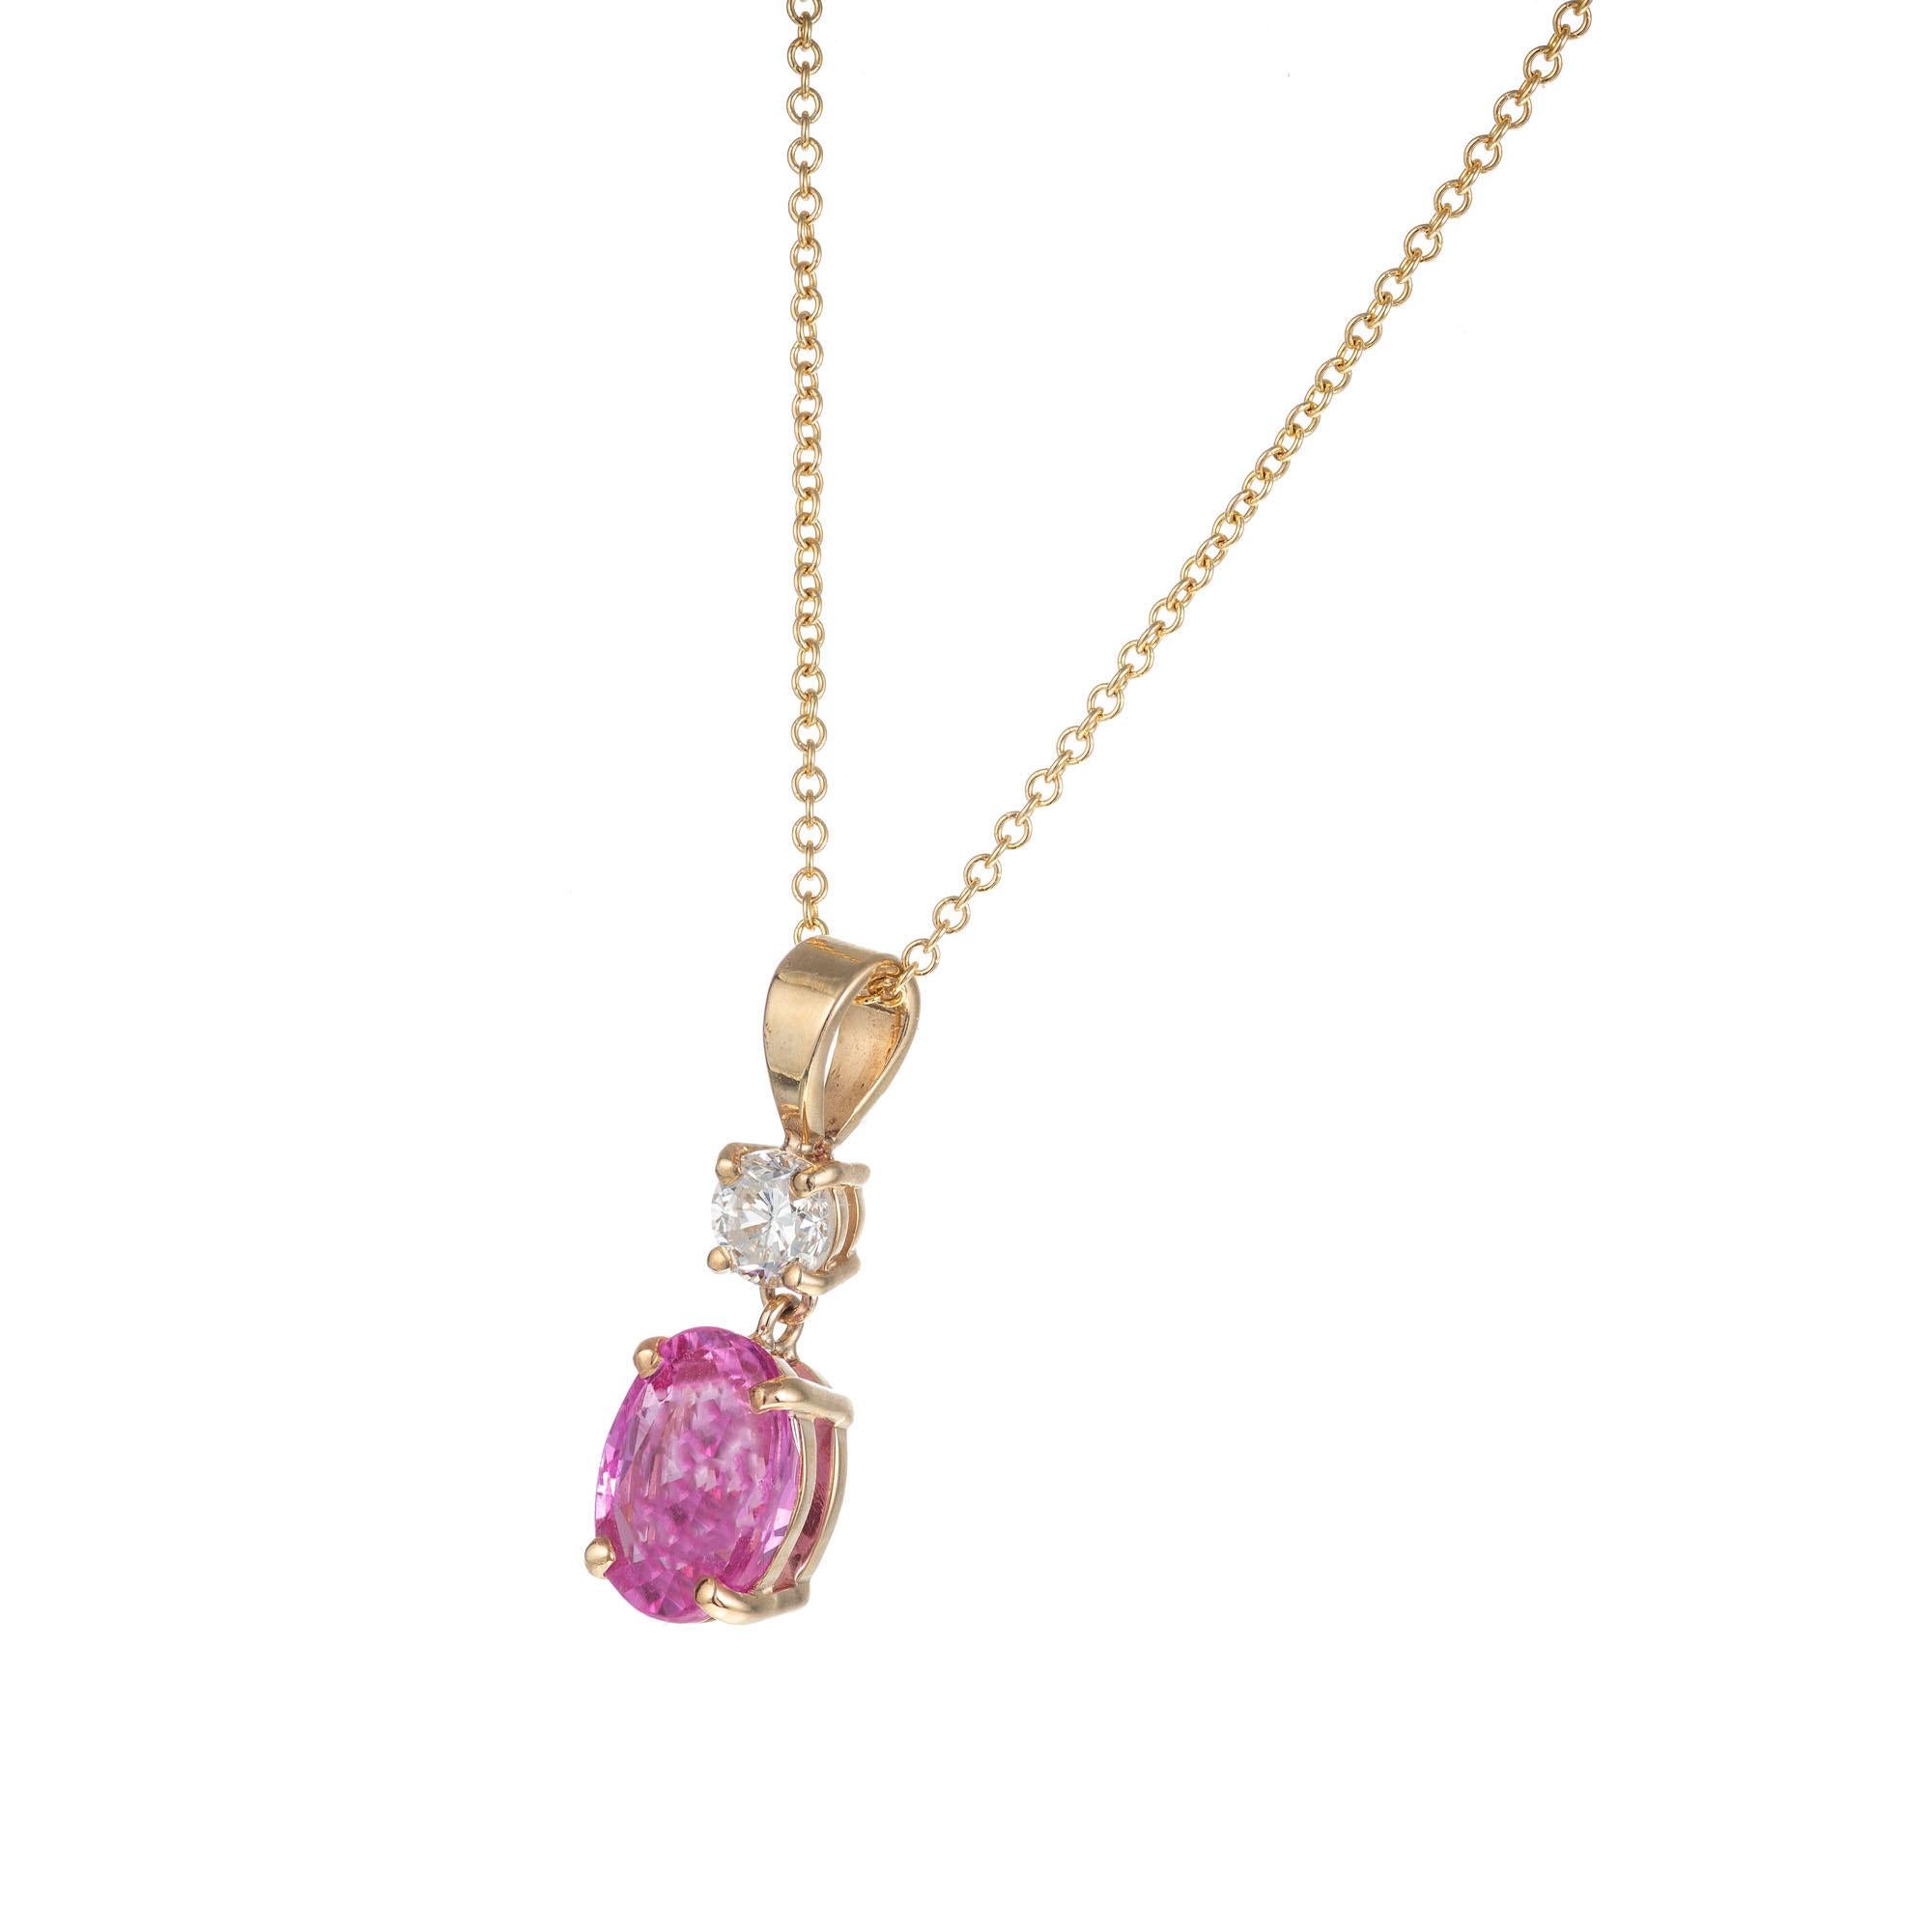 GIA certified natural pink sapphire and diamond pendant necklace. Simple heat only Oval pink sapphire with one round brilliant cut accent diamond set in 14k yellow gold, 18 inch chain. Simple heat only. Designed and created in the Peter Suchy